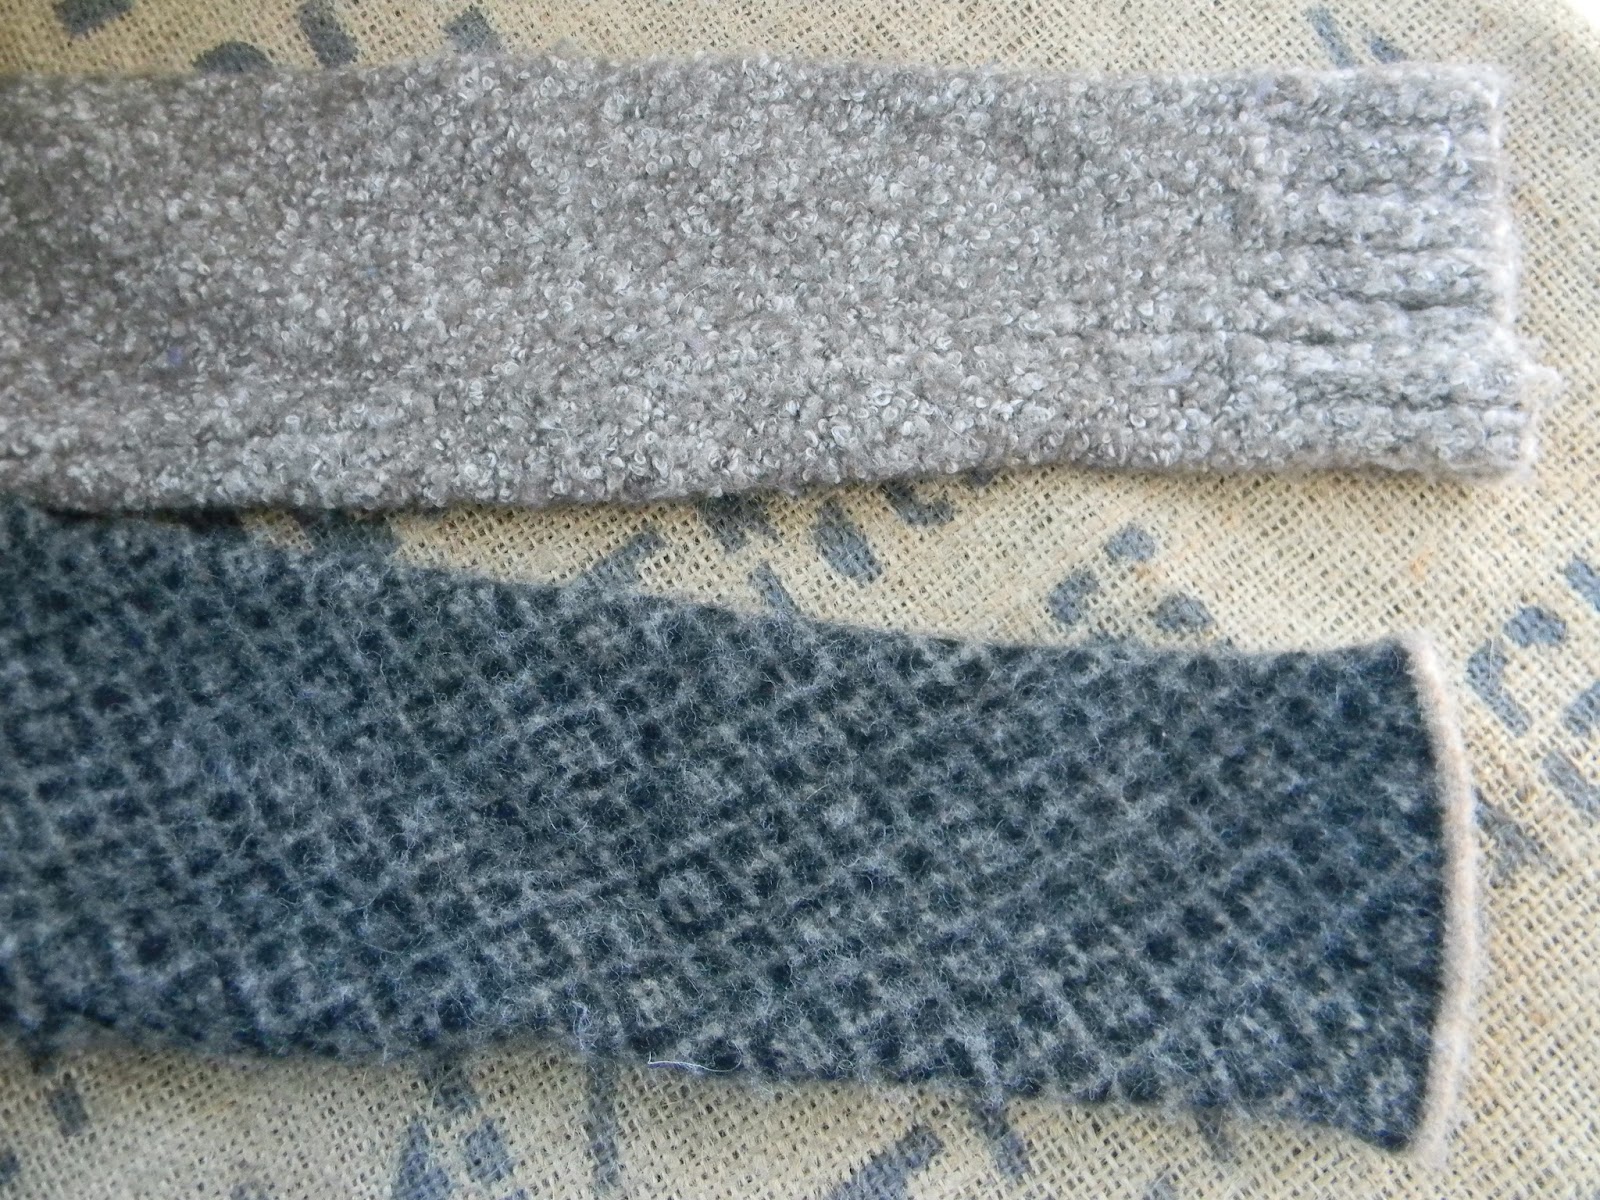 Artistic Endeavors 101: Recycled Wool Sweater Cozies